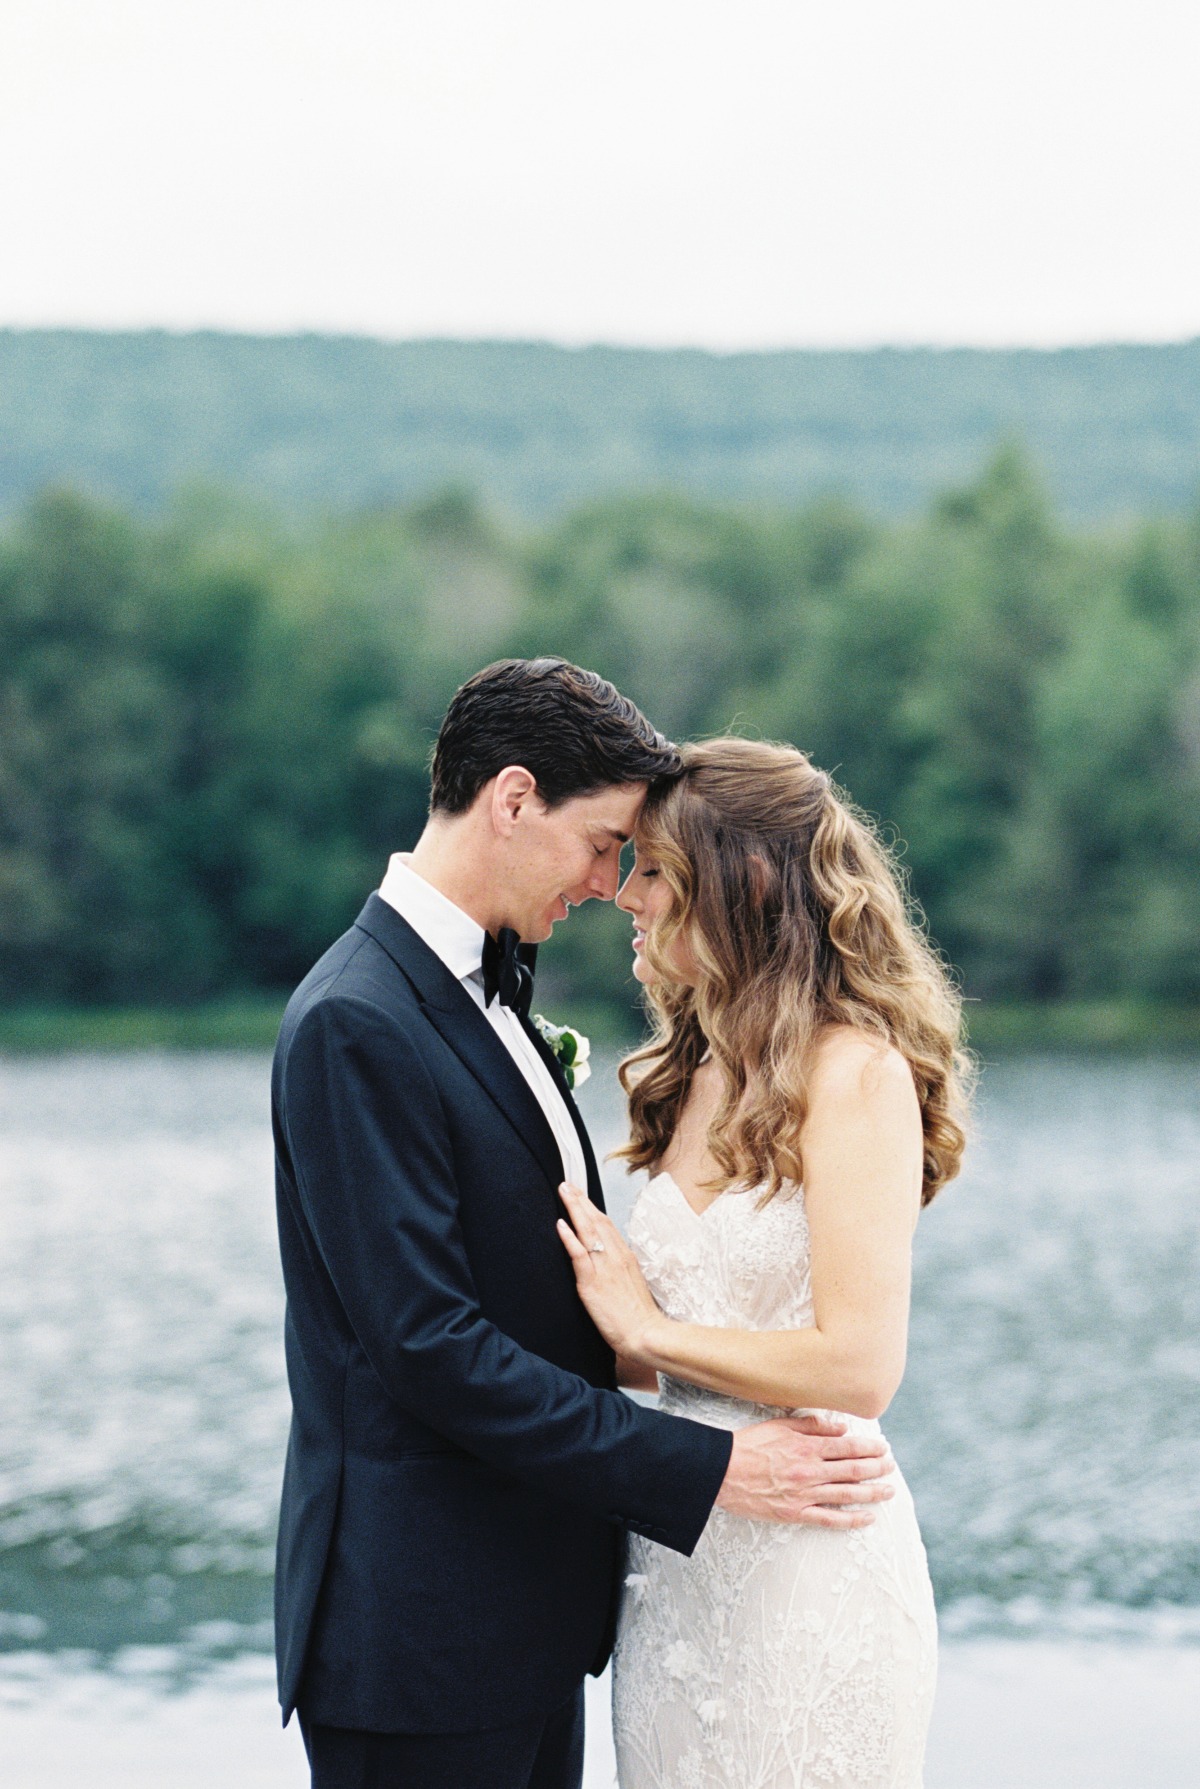 Romantic bride and groom portraits at lake in Catskills